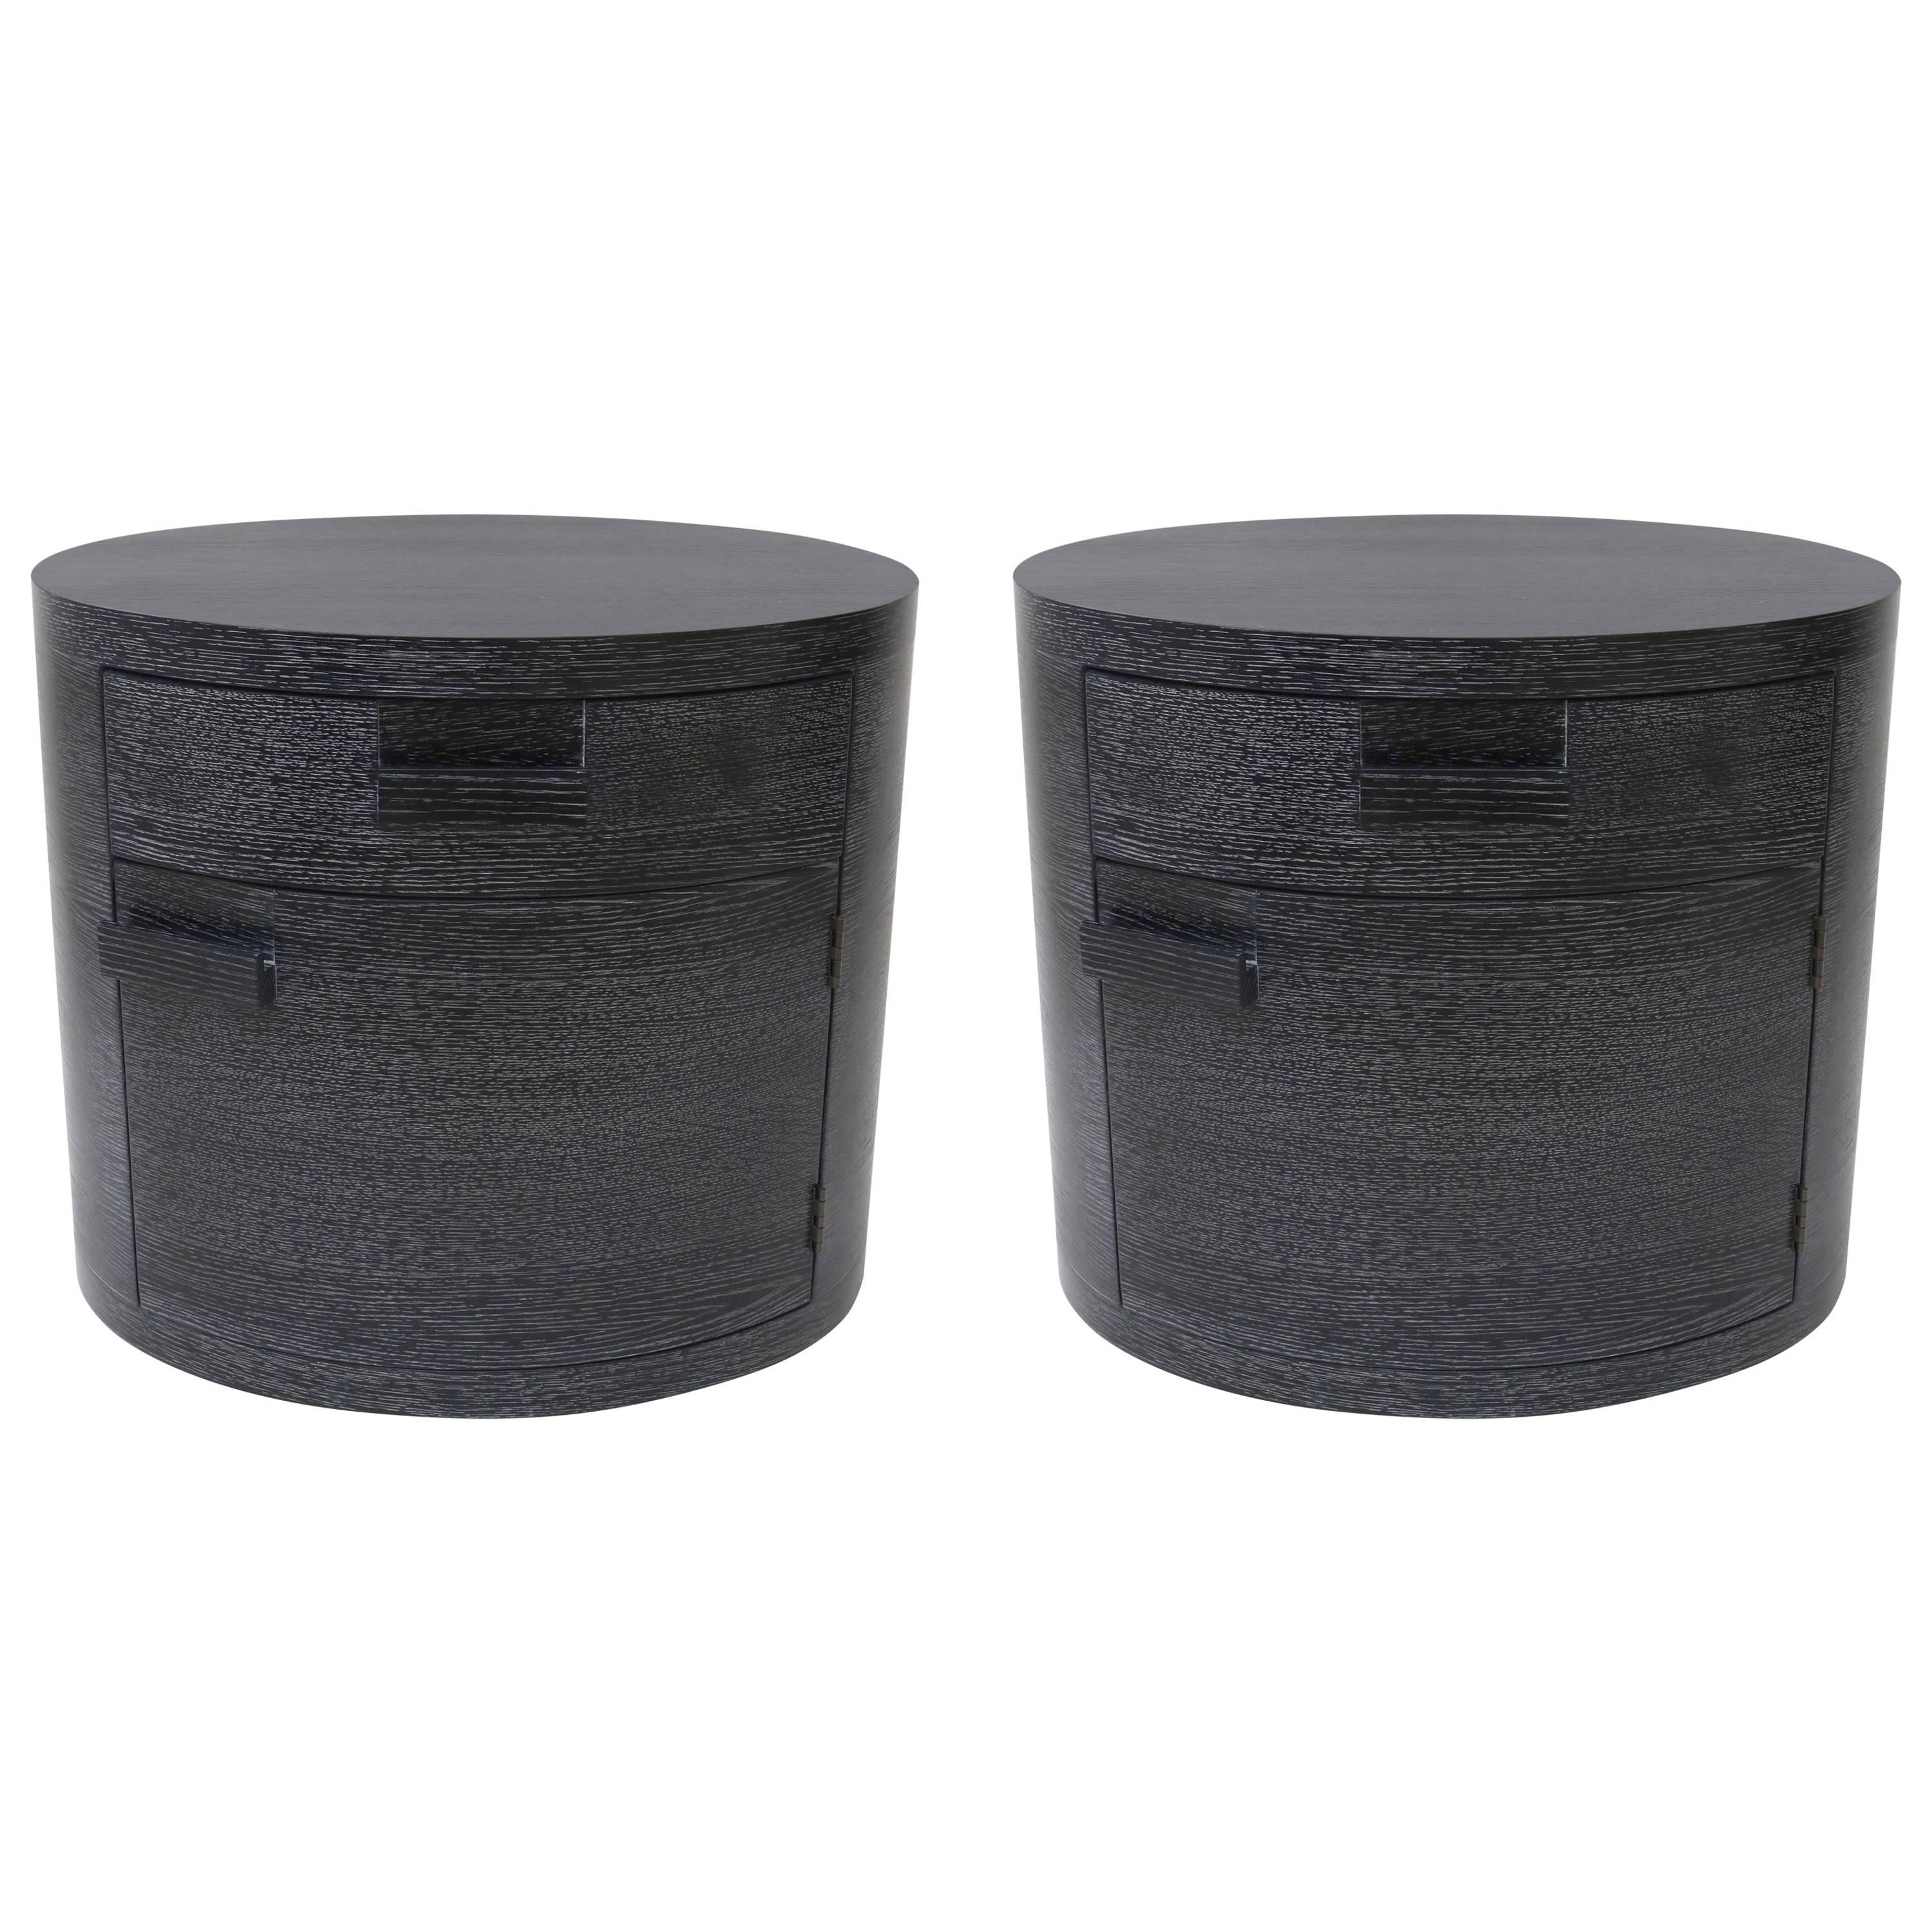 Pair of Oval Form Bedside Tables, Style of Jay Spectre in Cerused Black Oak